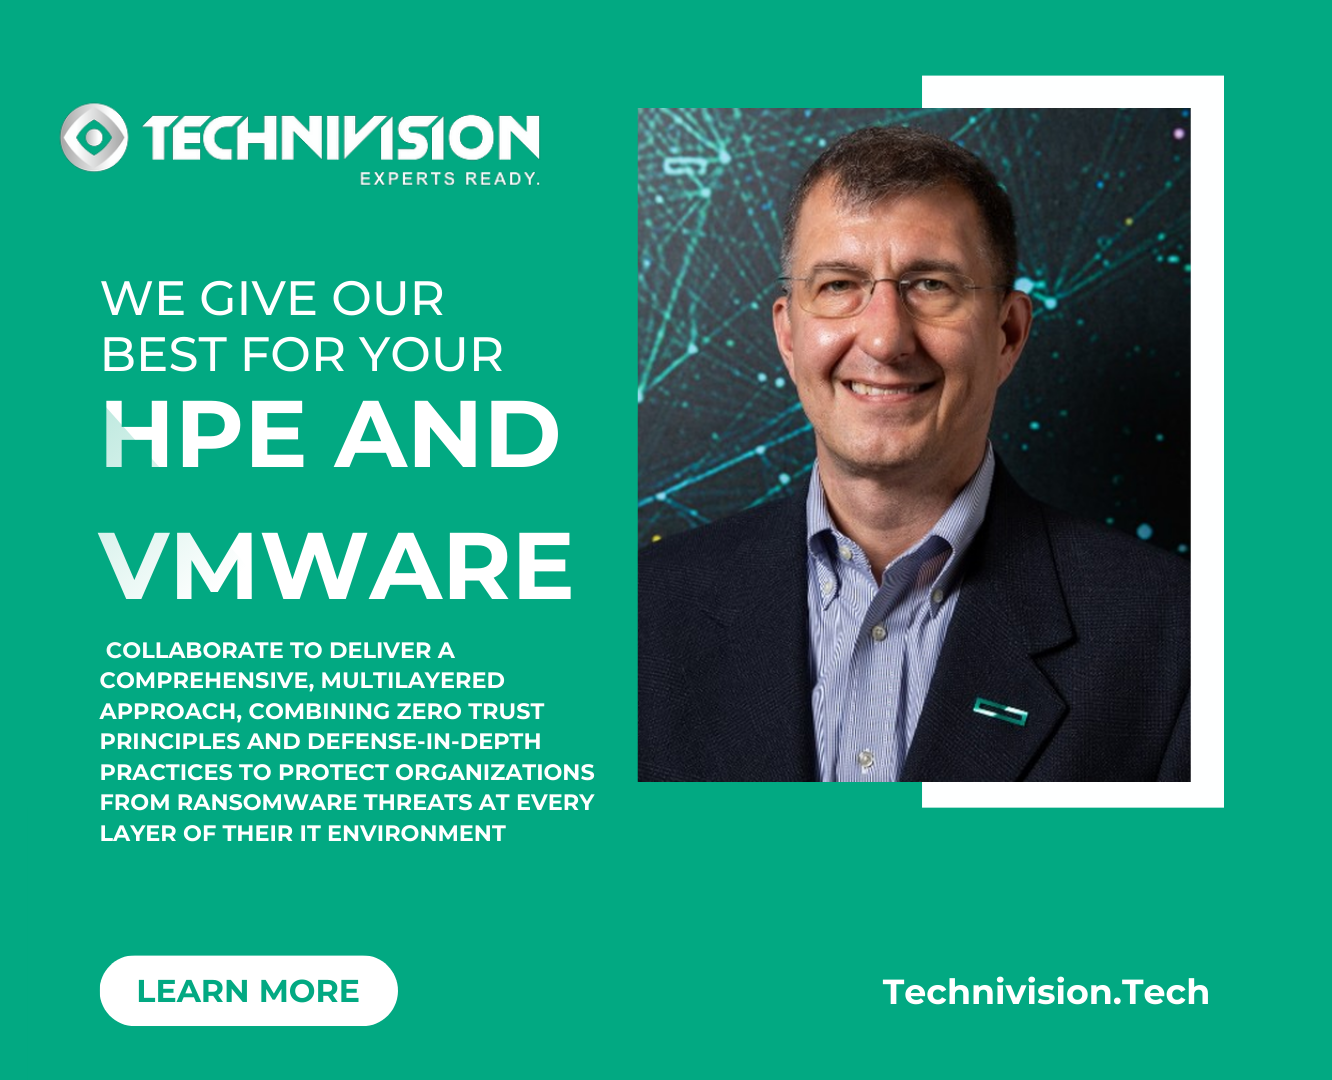 HPE Compute and VMware vSphere collaborate to combat ransomware, leveraging a powerful combination of defense-in-depth and zero trust